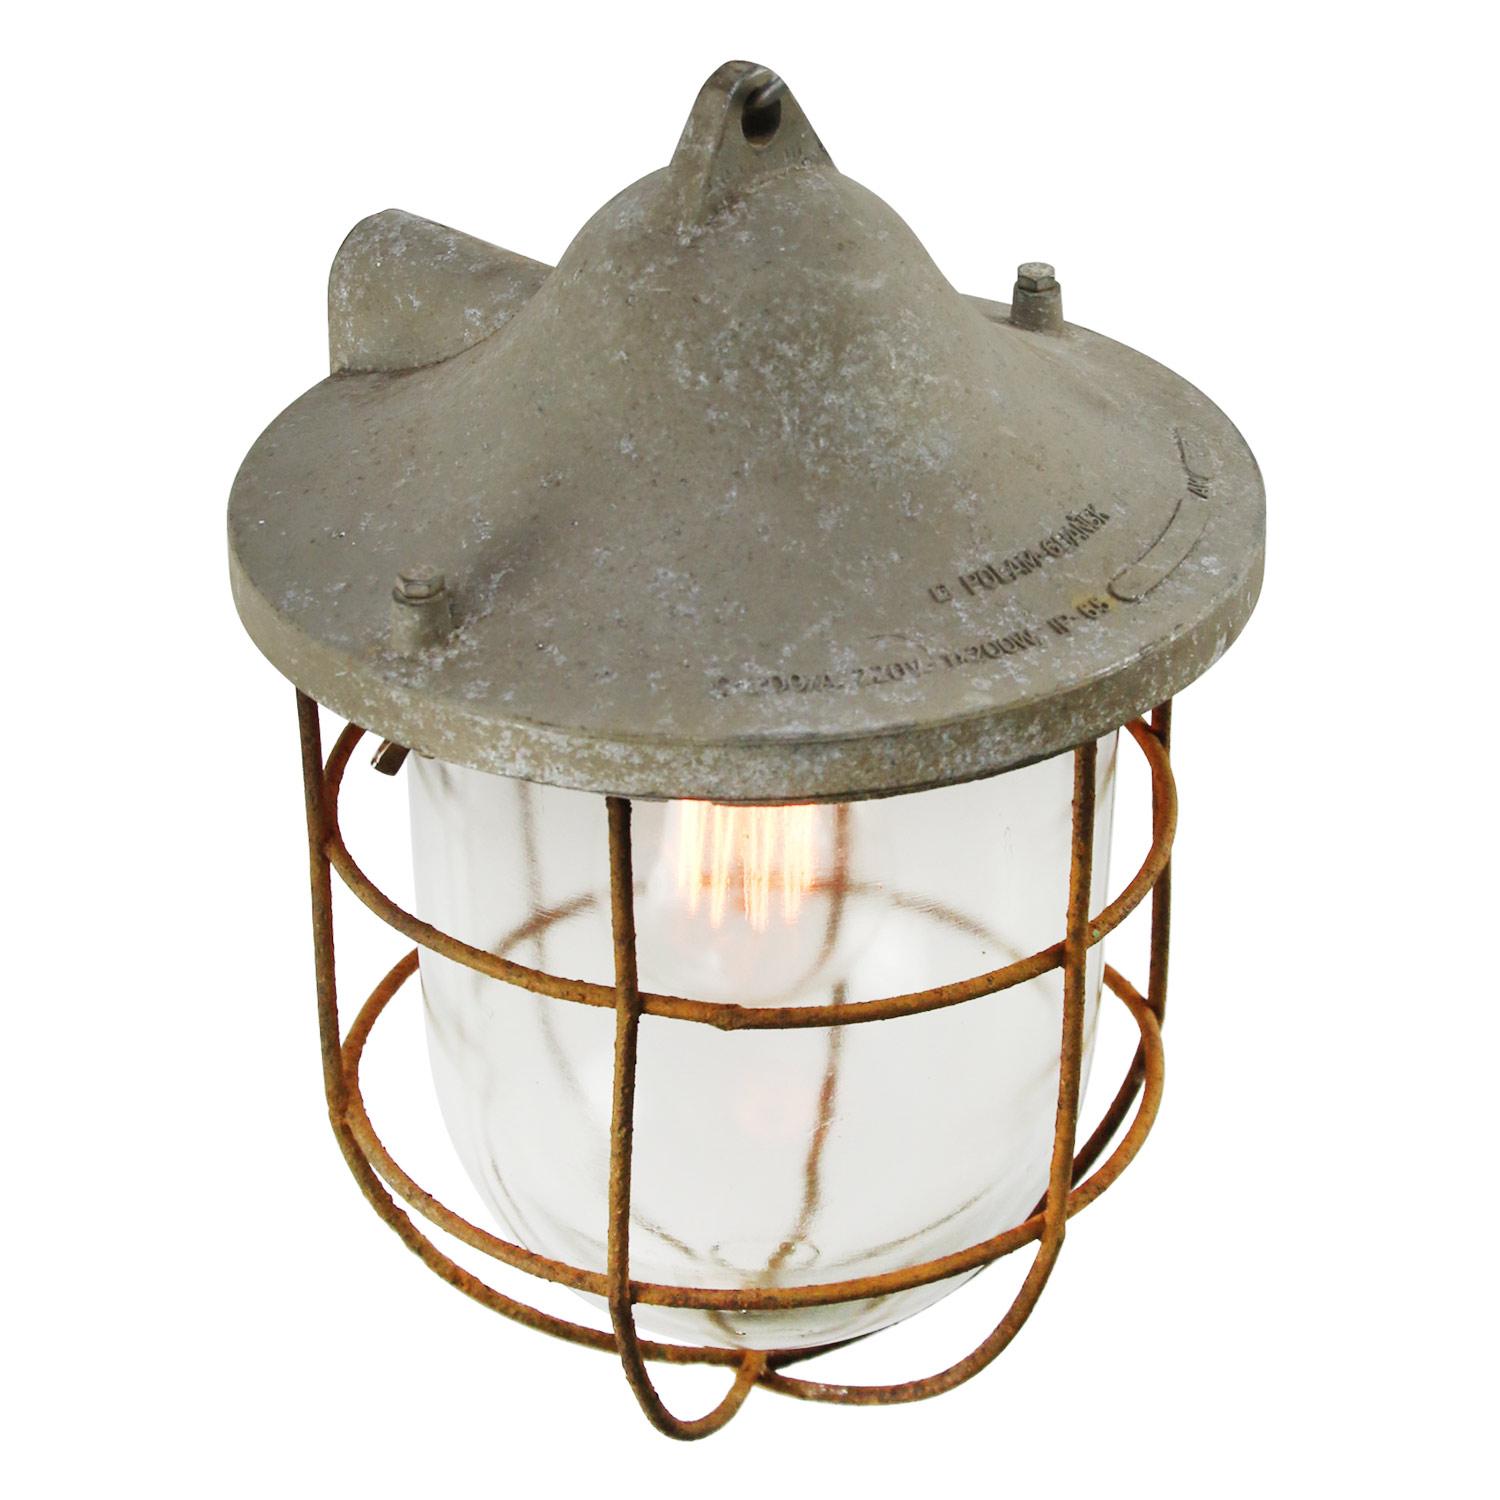 Hanging lamp clear glass. Gray top with cast aluminum top.

Weight: 2.9 kg / 6.4 lb

Priced per individual item. All lamps have been made suitable by international standards for incandescent light bulbs, energy-efficient and LED bulbs. E26/E27